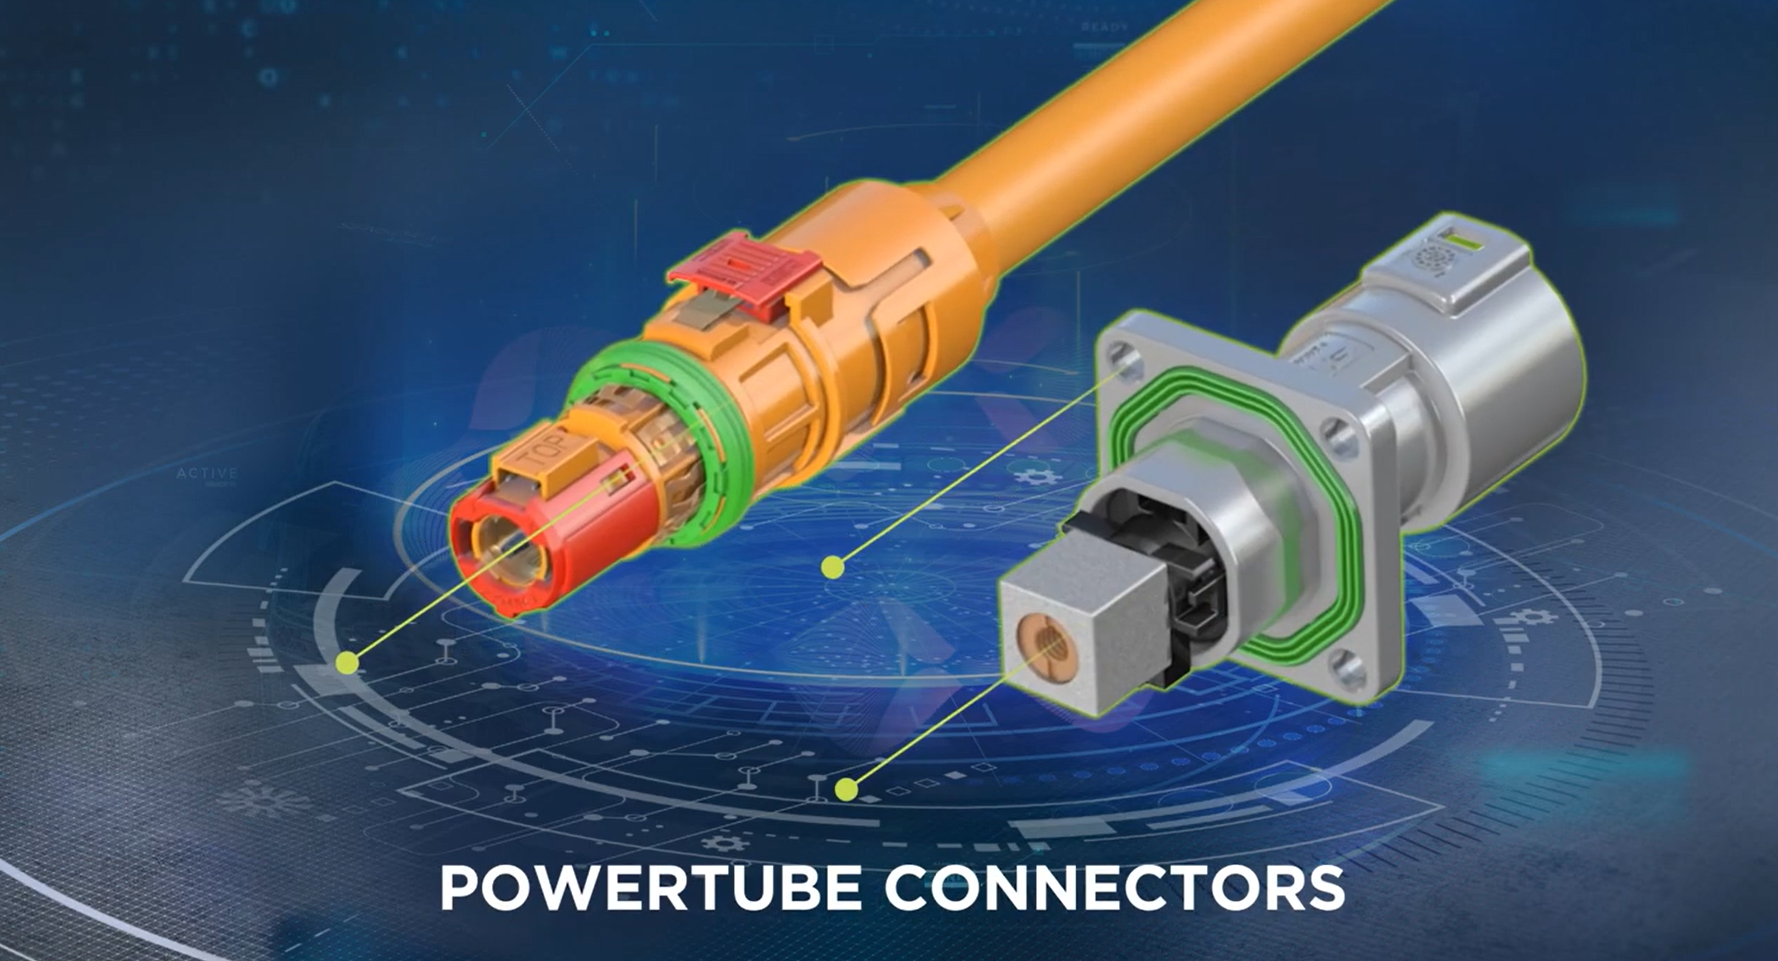  HIVONEX connector and charging solutions